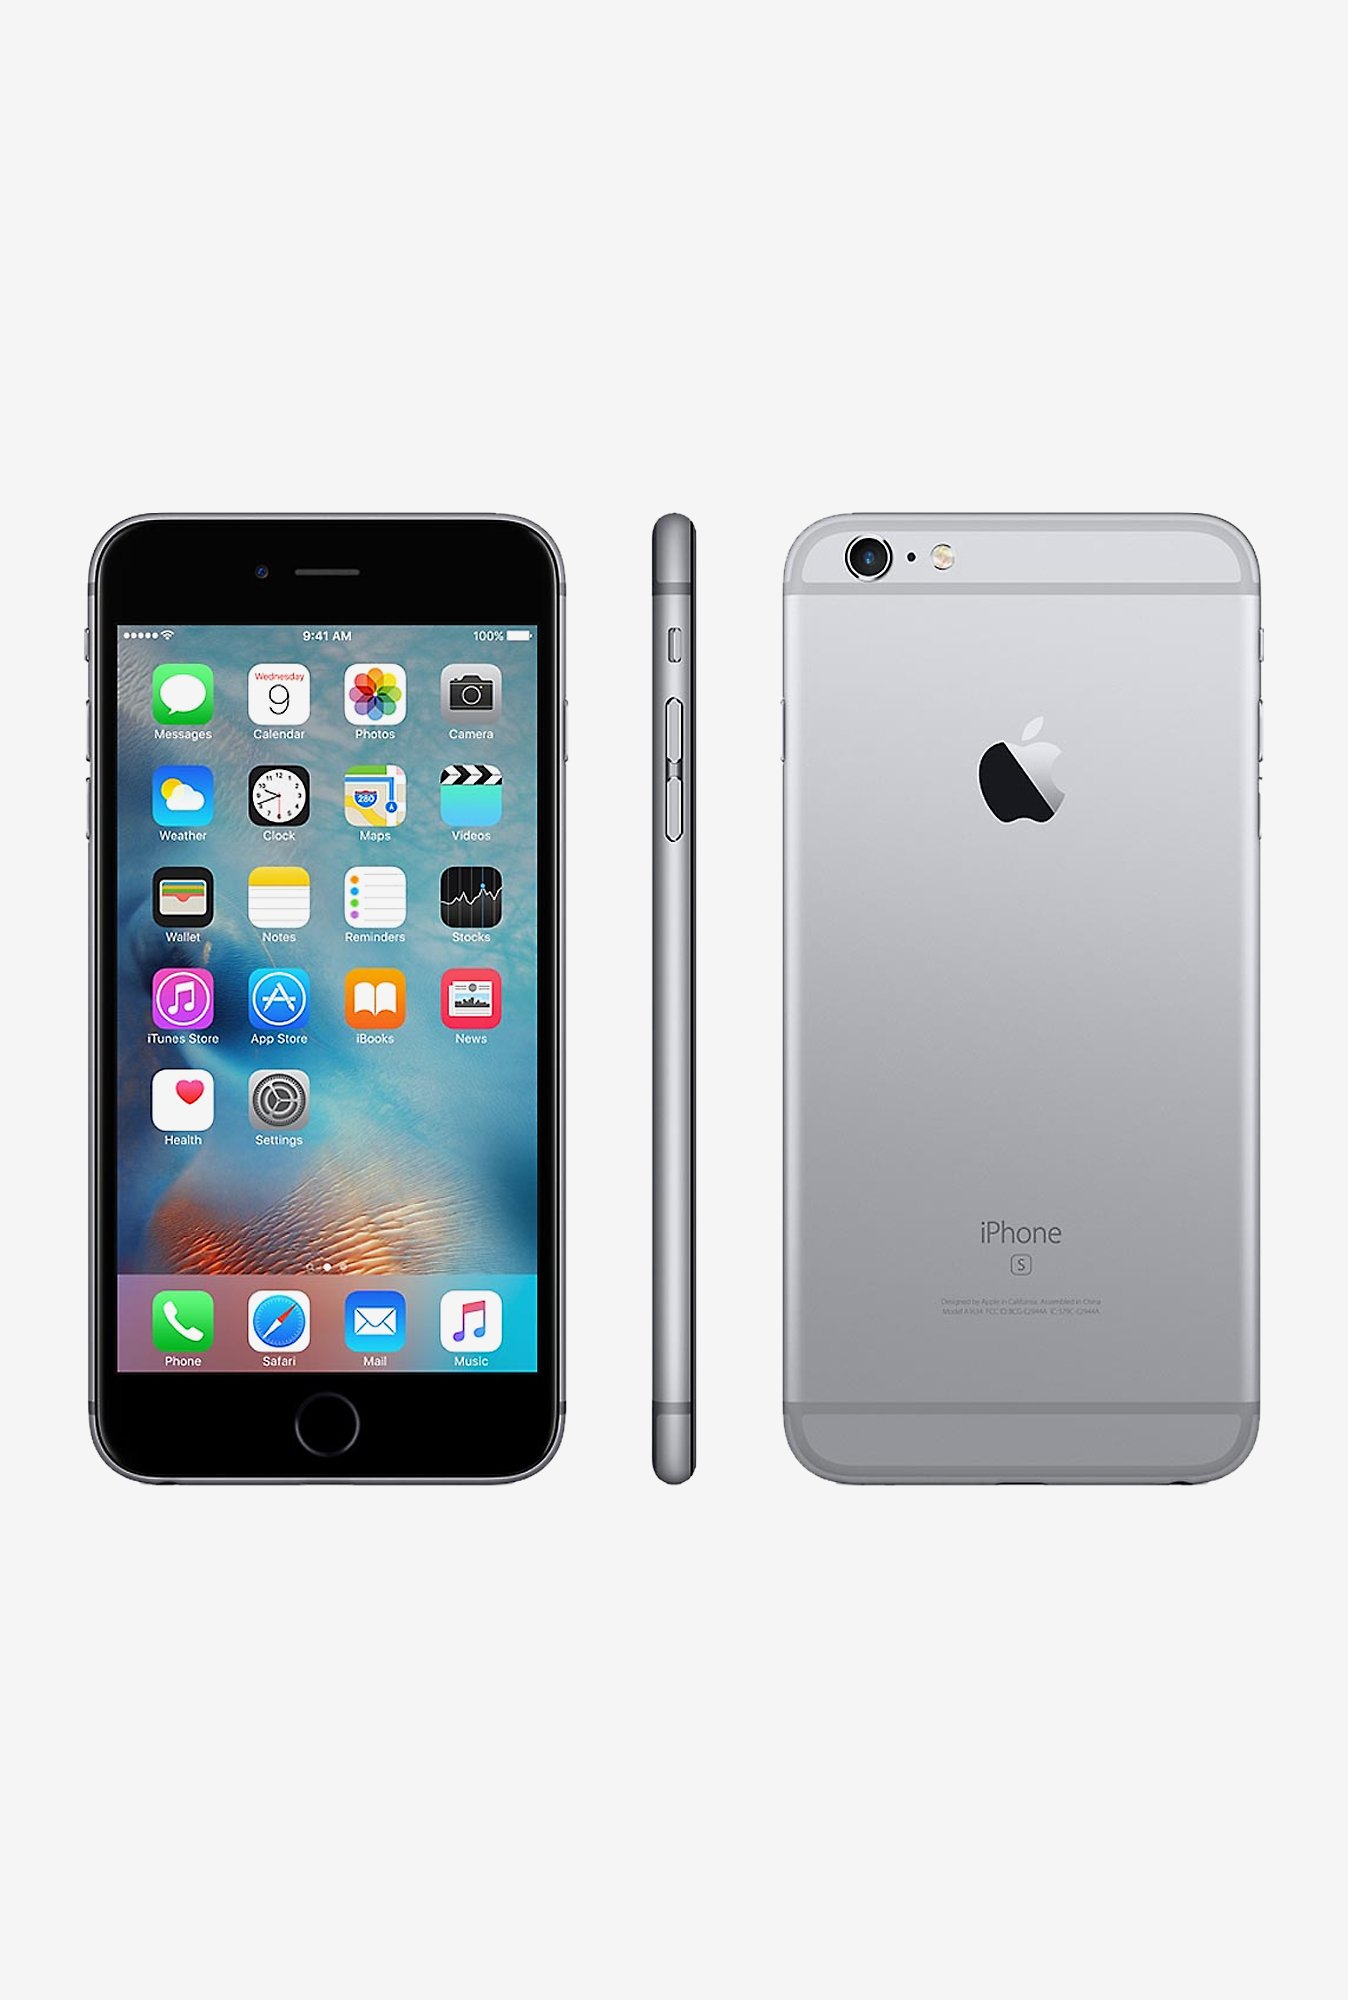 Buy Iphone 6s Plus 16gb Space Grey Online At Best Price In India At Tata Cliq